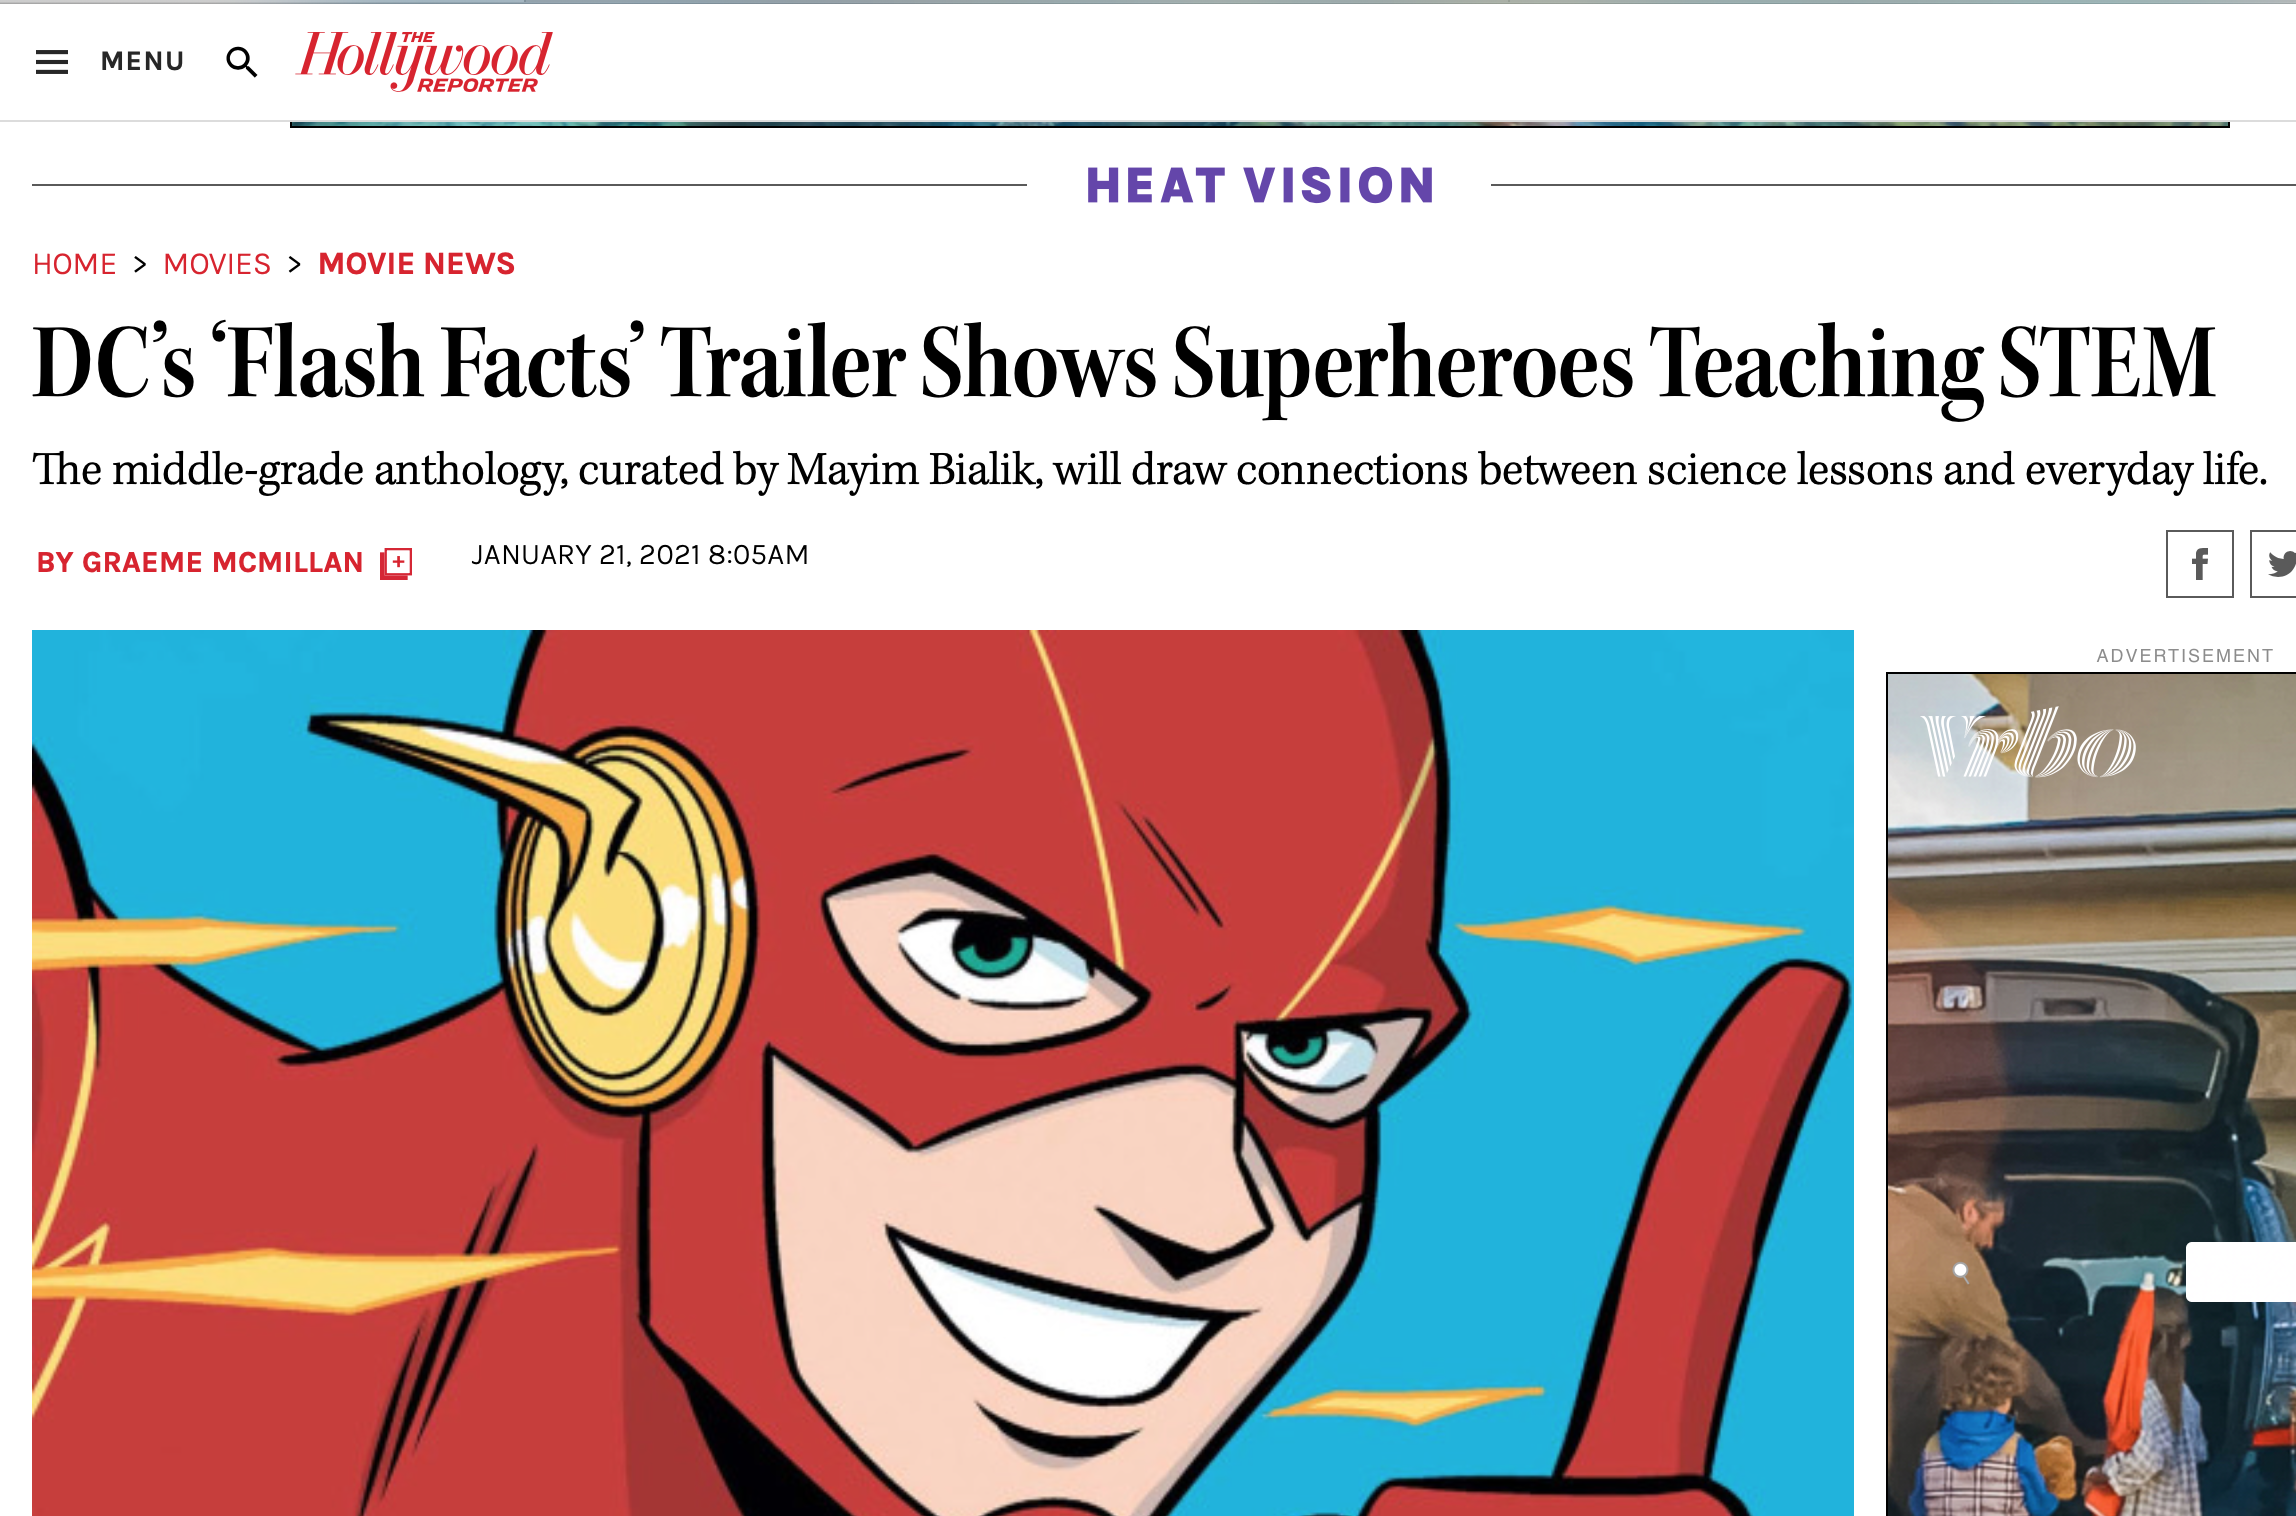 THE HOLLYWOOD REPORTER: DC’s ‘Flash Facts’ Trailer Shows Superheroes Teaching STEM